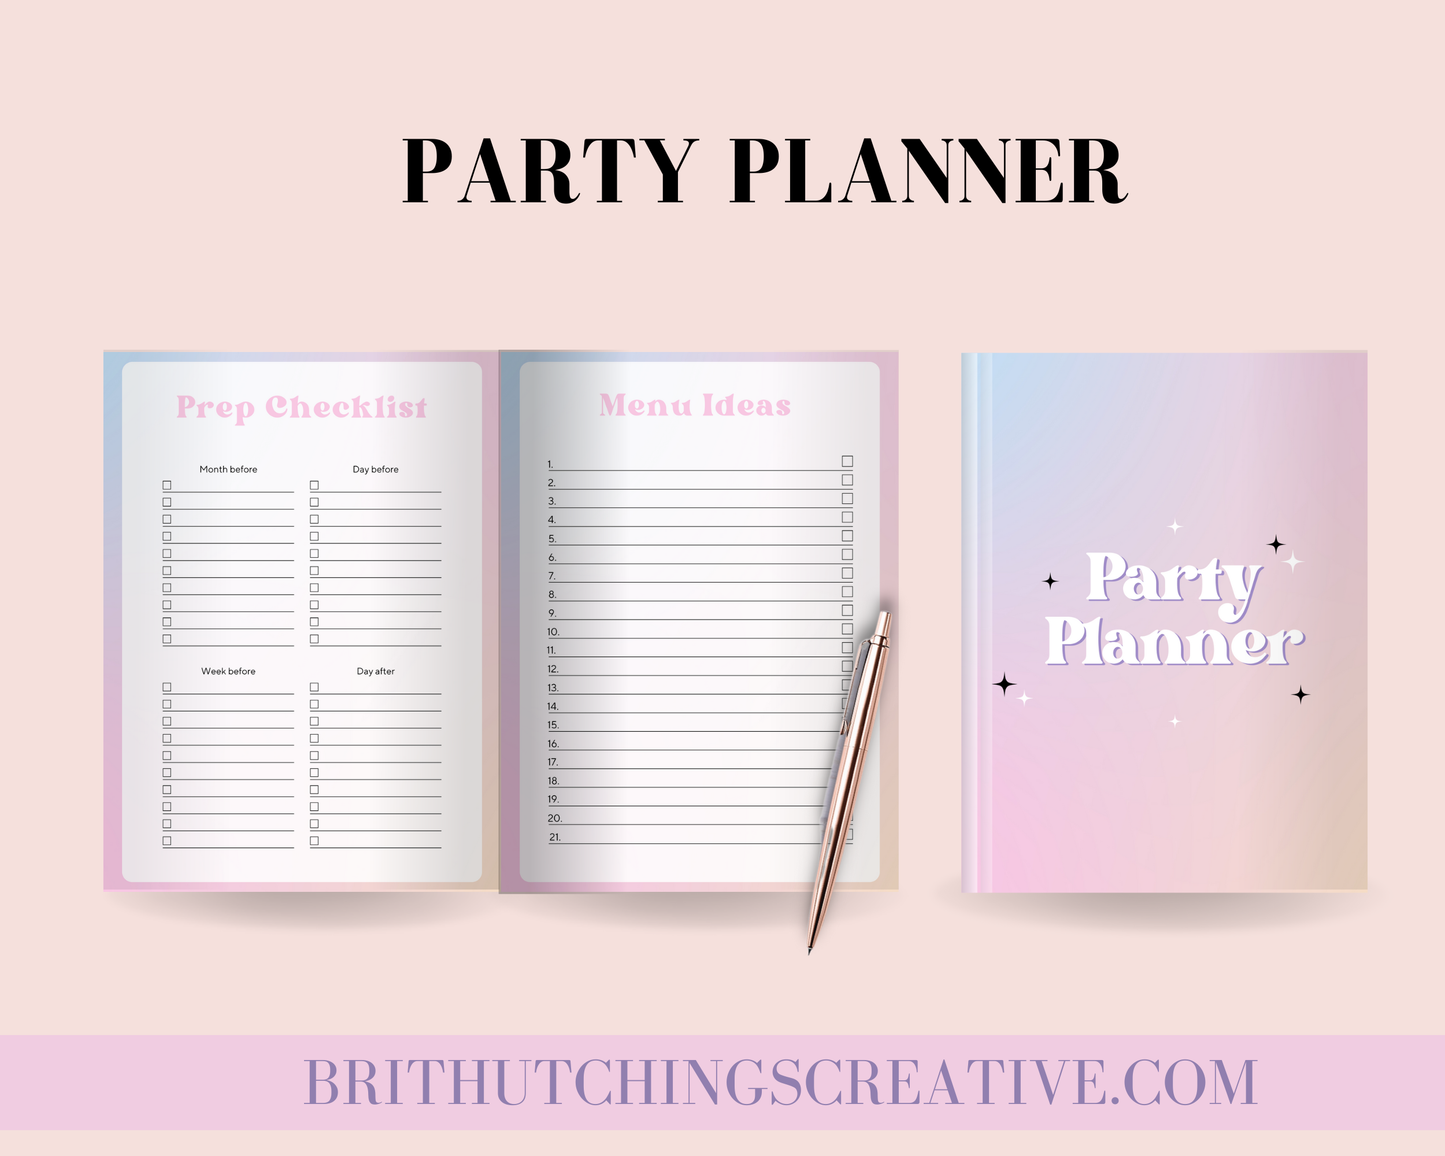 Party Planner – Your Ultimate Event Planning Companion